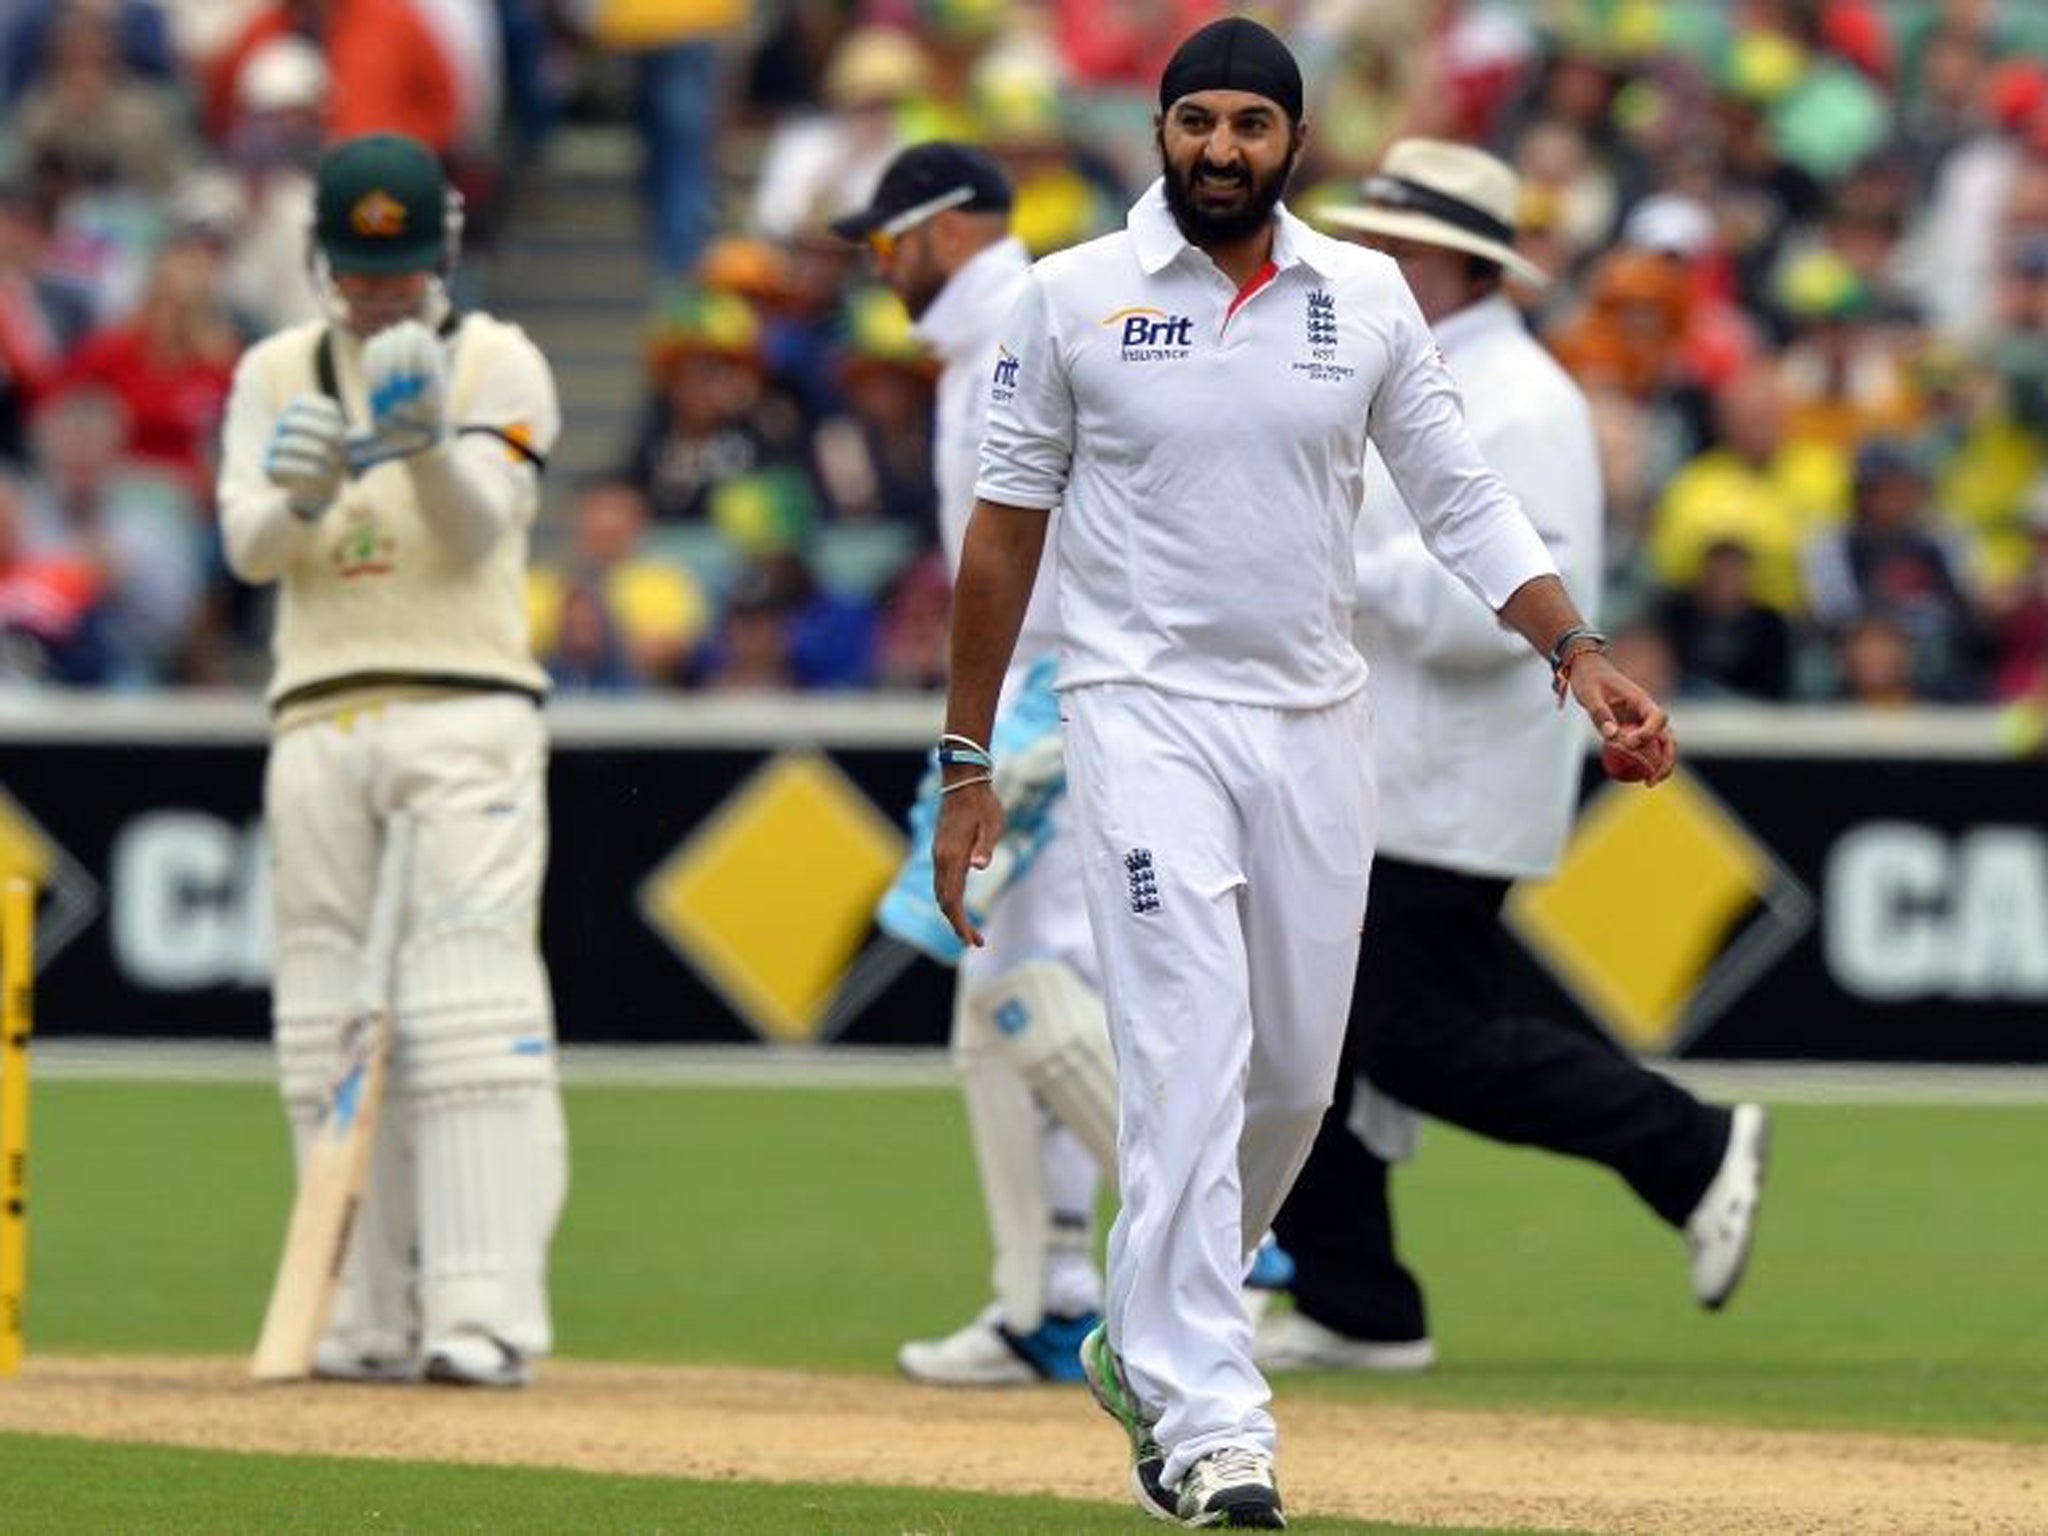 Recalled Monty Panesar dropped George Bailey on 10 off his own bowling